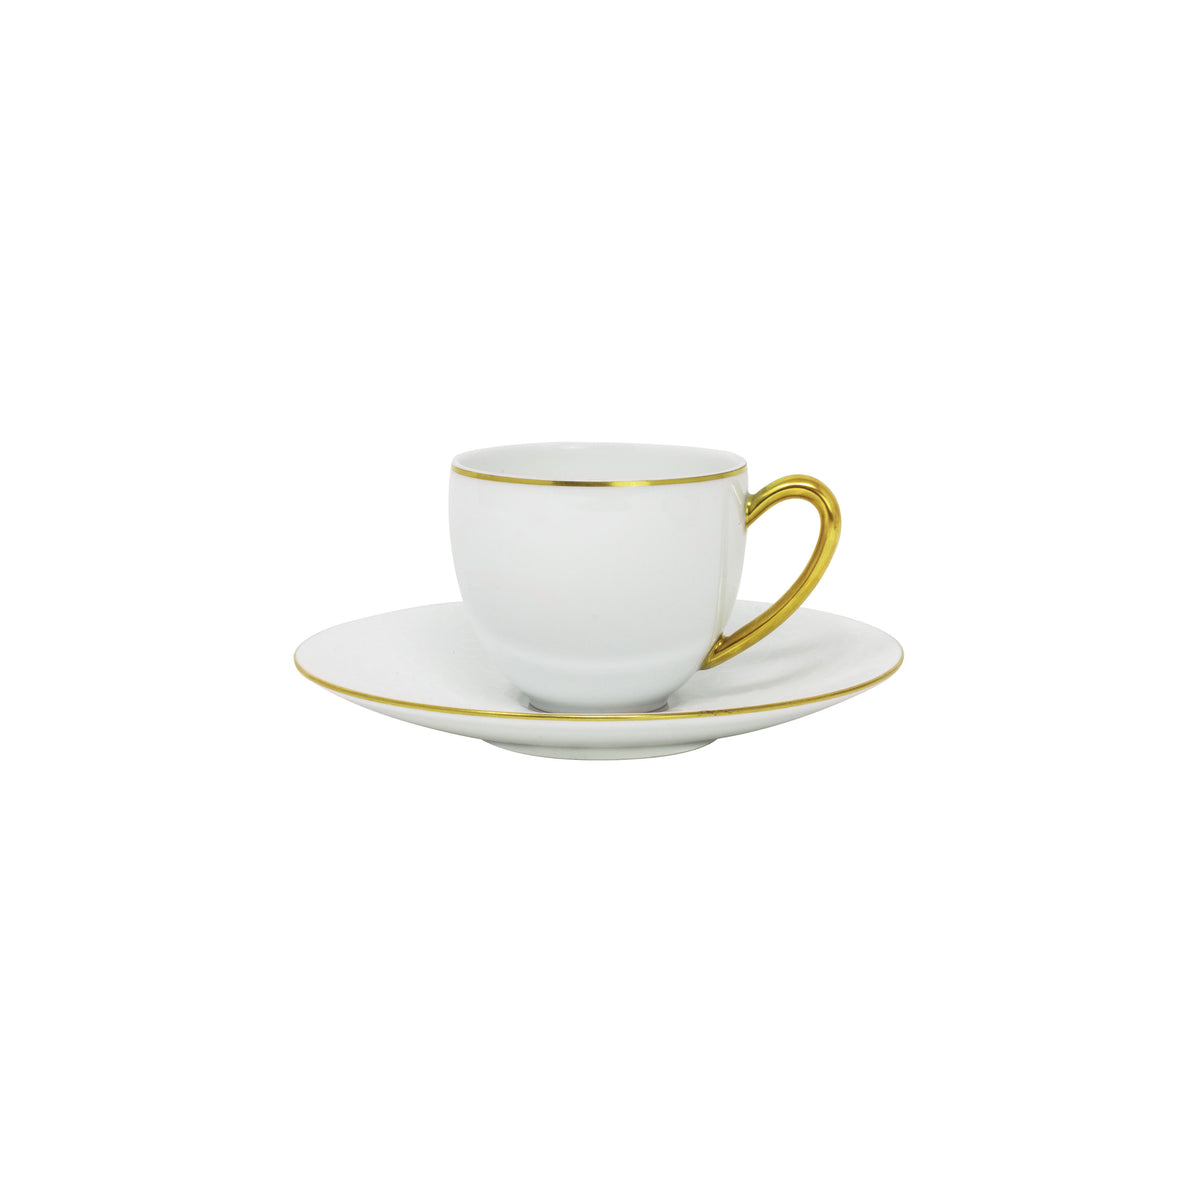 ARJUNA white on white mesh Gold - Coffee set (cup & saucer)